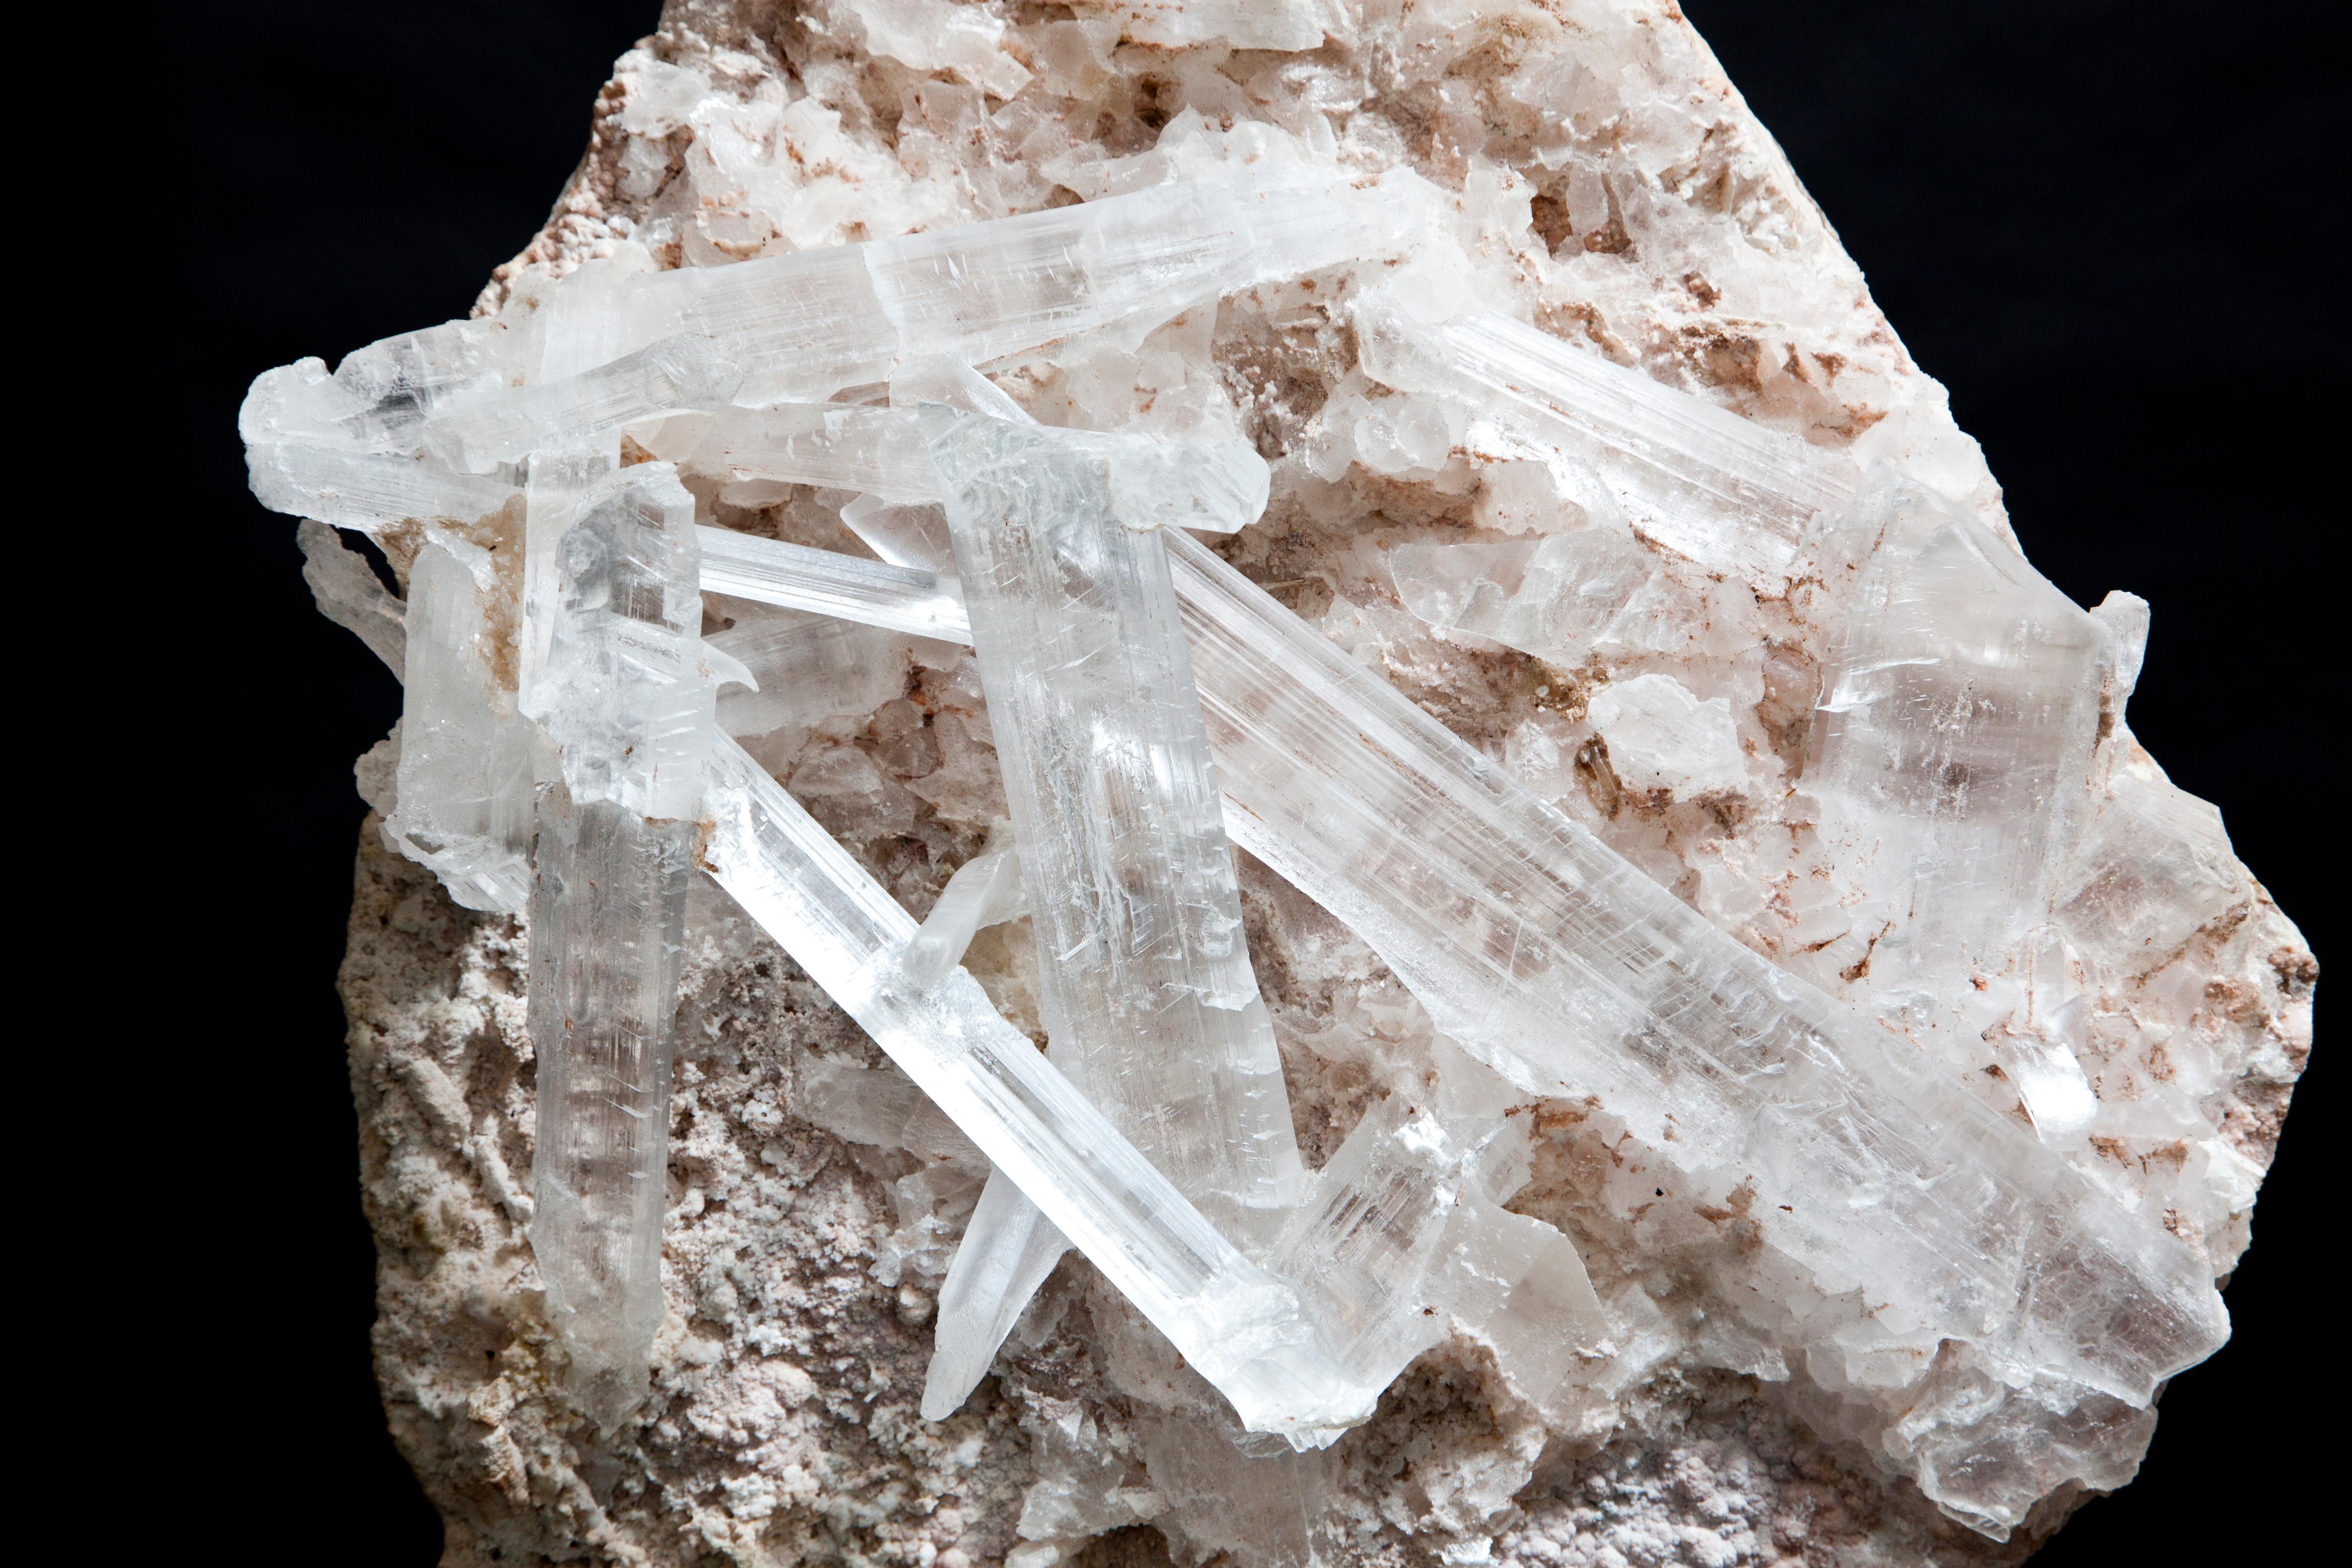 Exceptional Gypsum ‘Blade’ Mineral Cluster from China. A very rare Gypsum specimen with a superb 'three-dimensional' gypsum blade cluster on the front of the piece.

About

Since 1986 Dale has been sourcing the most unique fossils and minerals from